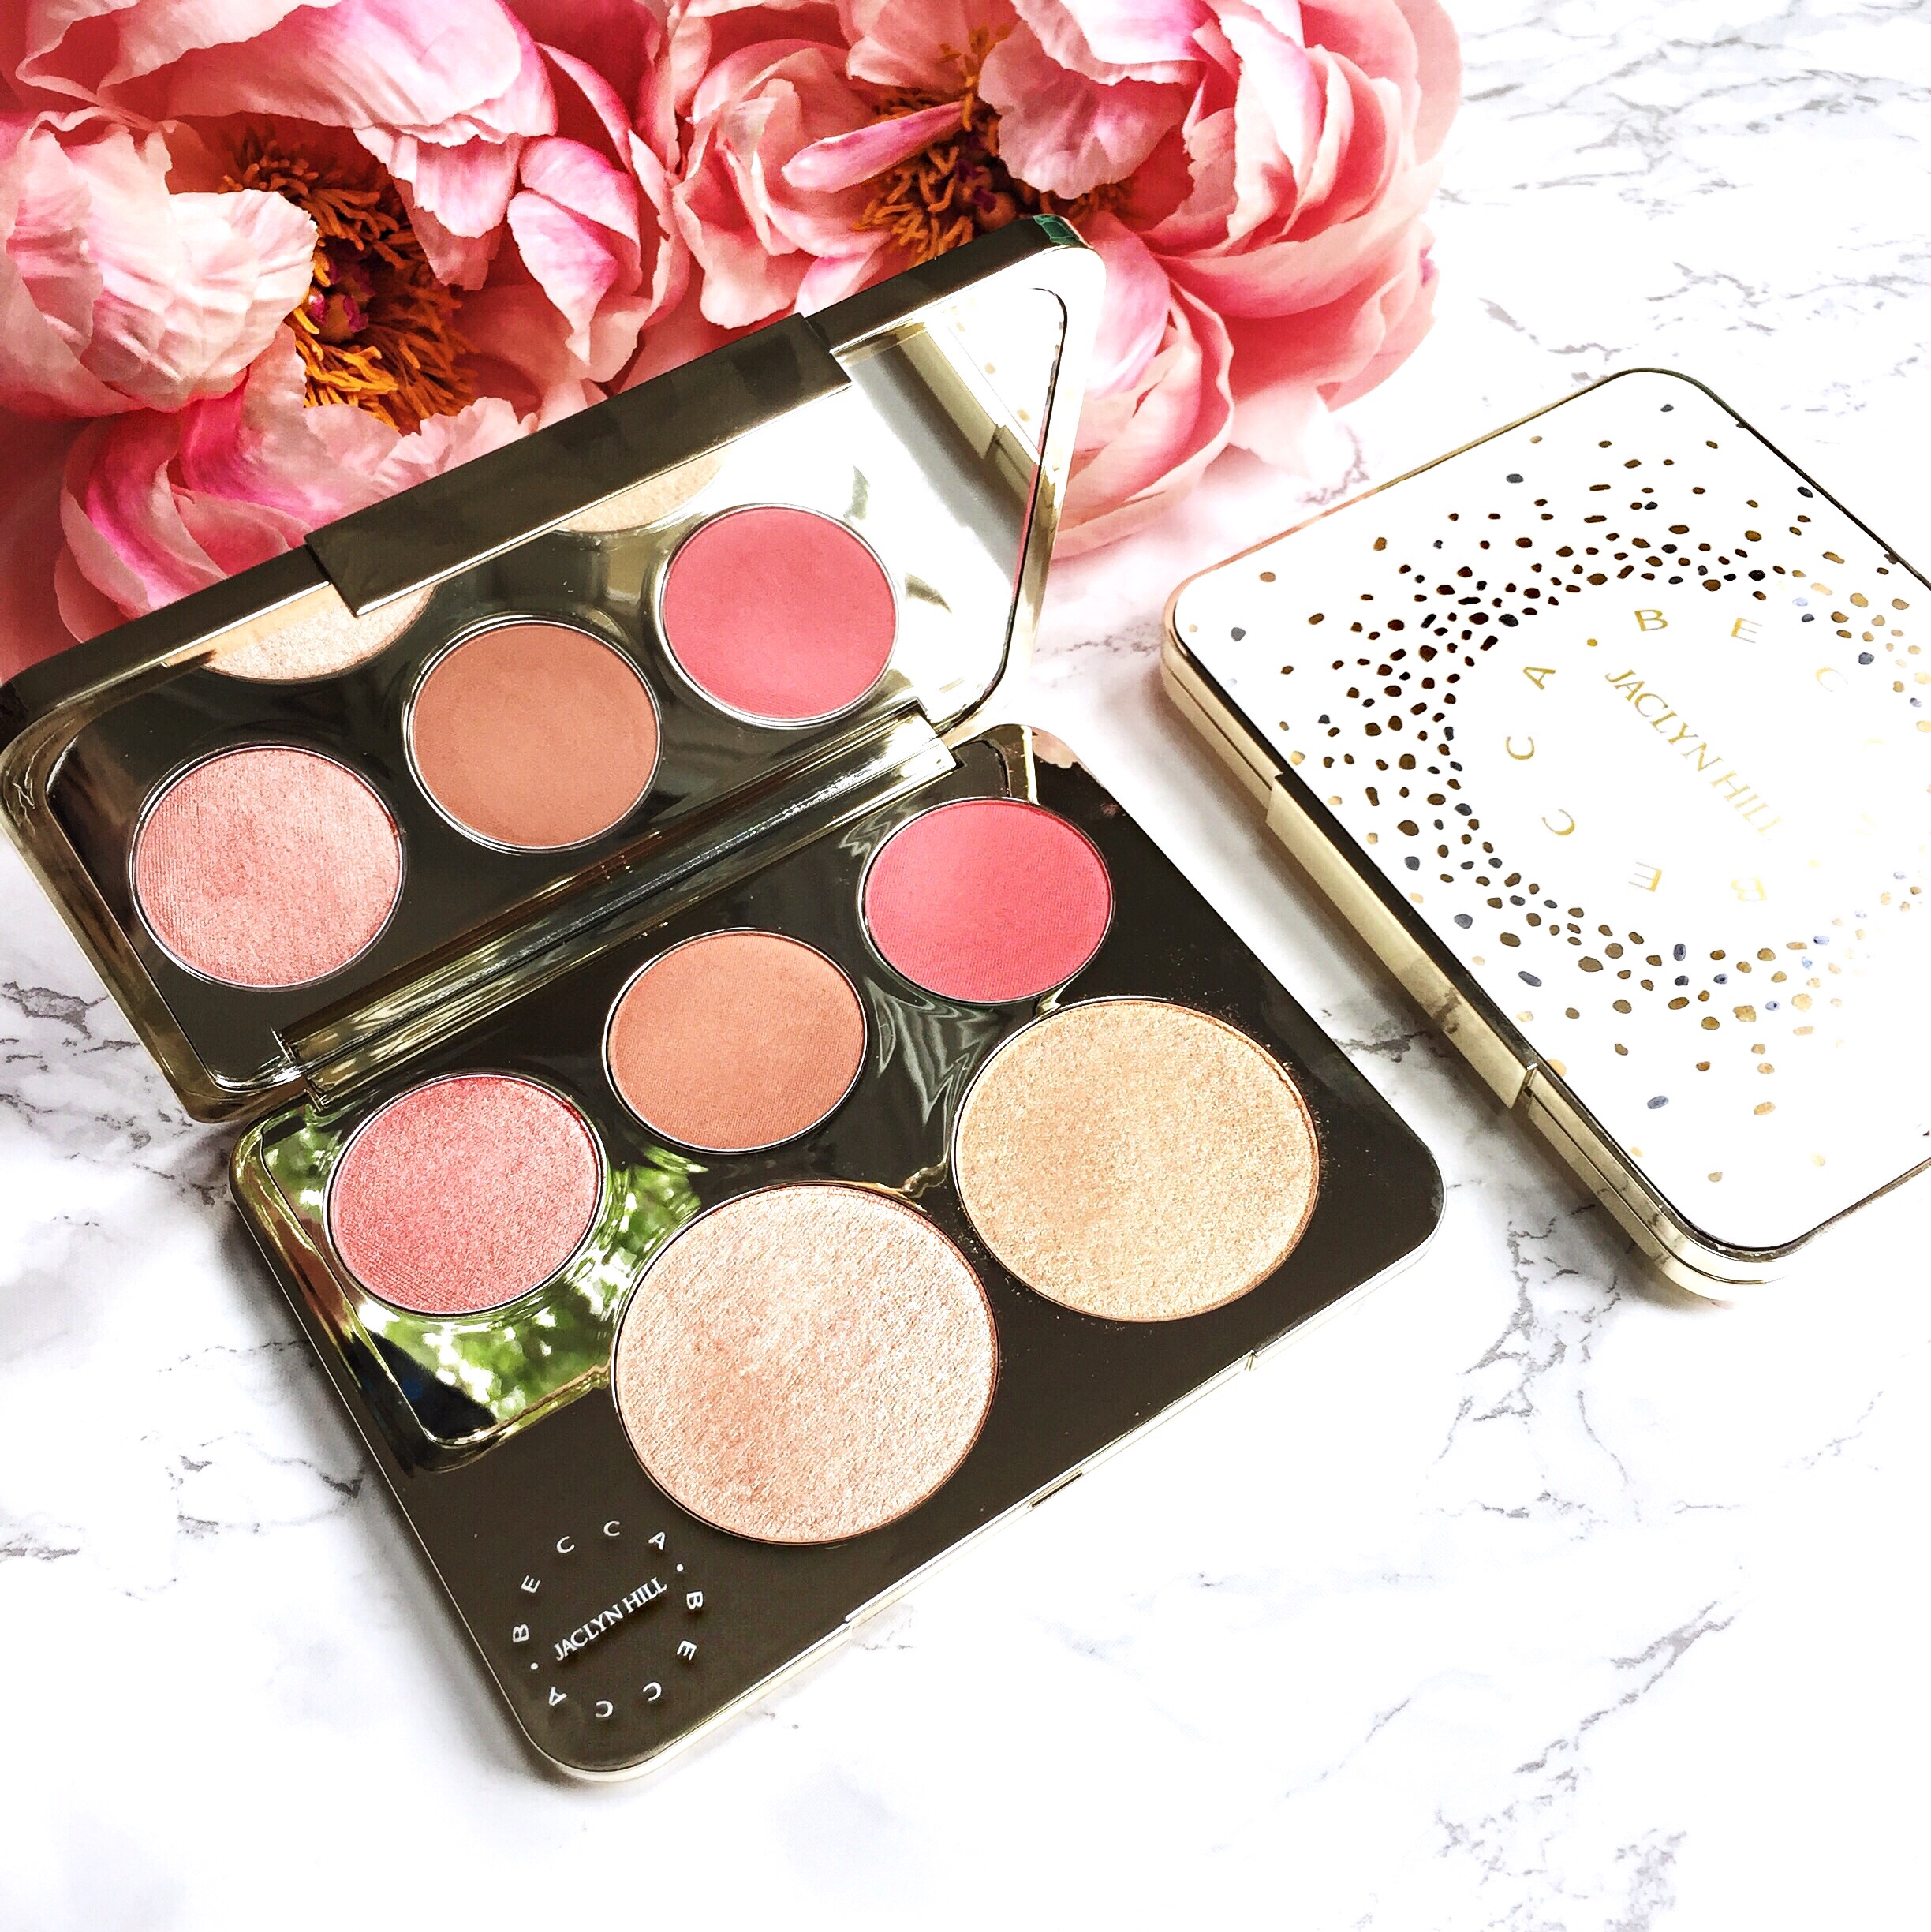 Becca Cosmetics x Jaclyn Hill – Champagne Collection Swatches